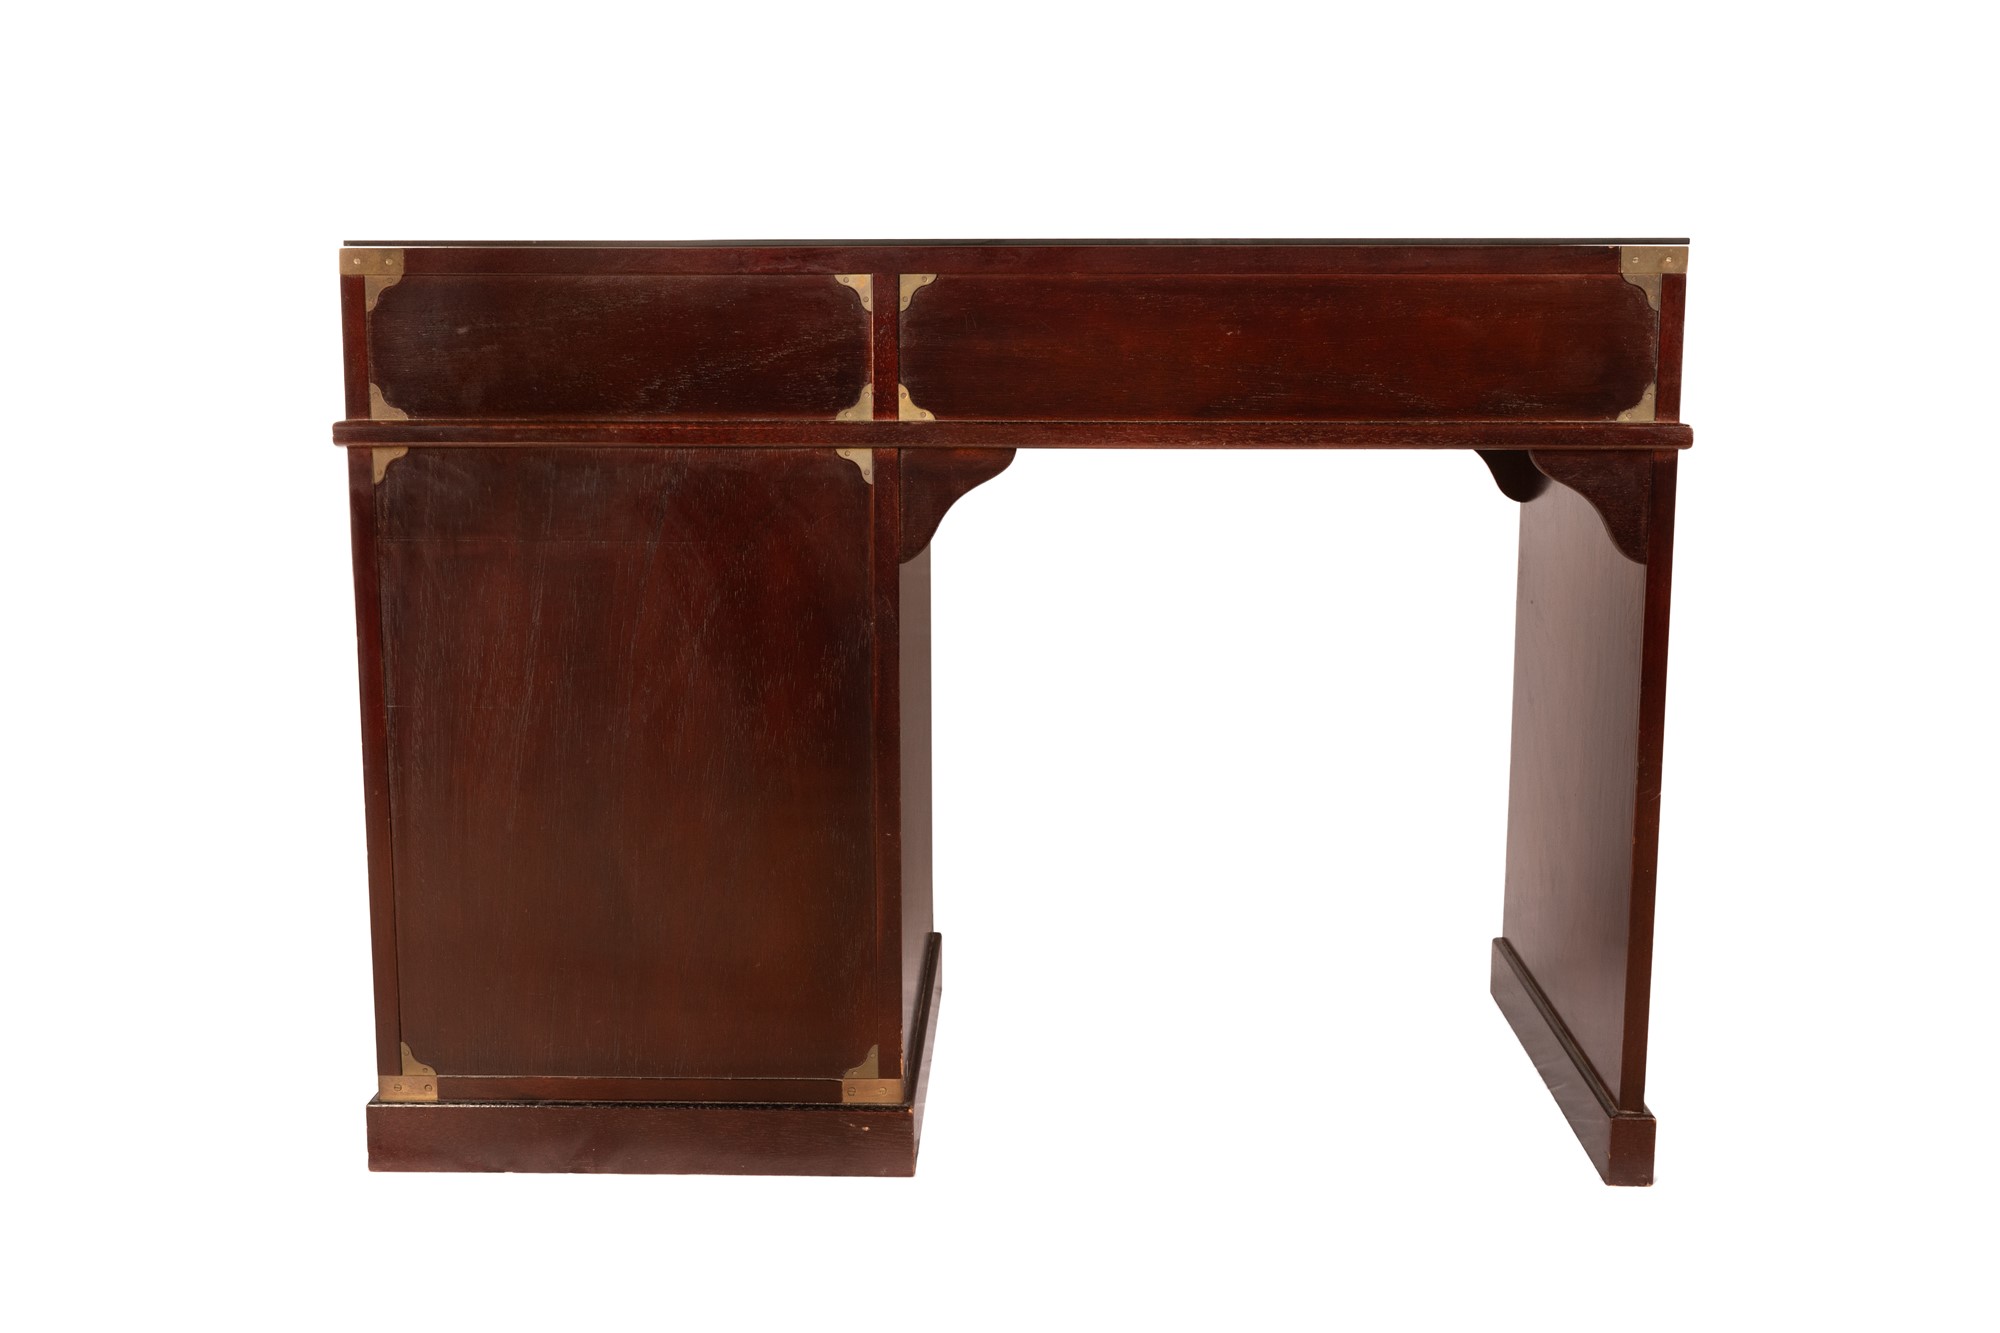 Byron marine style mahogany desk with five drawers on the front and glass top - Image 14 of 19